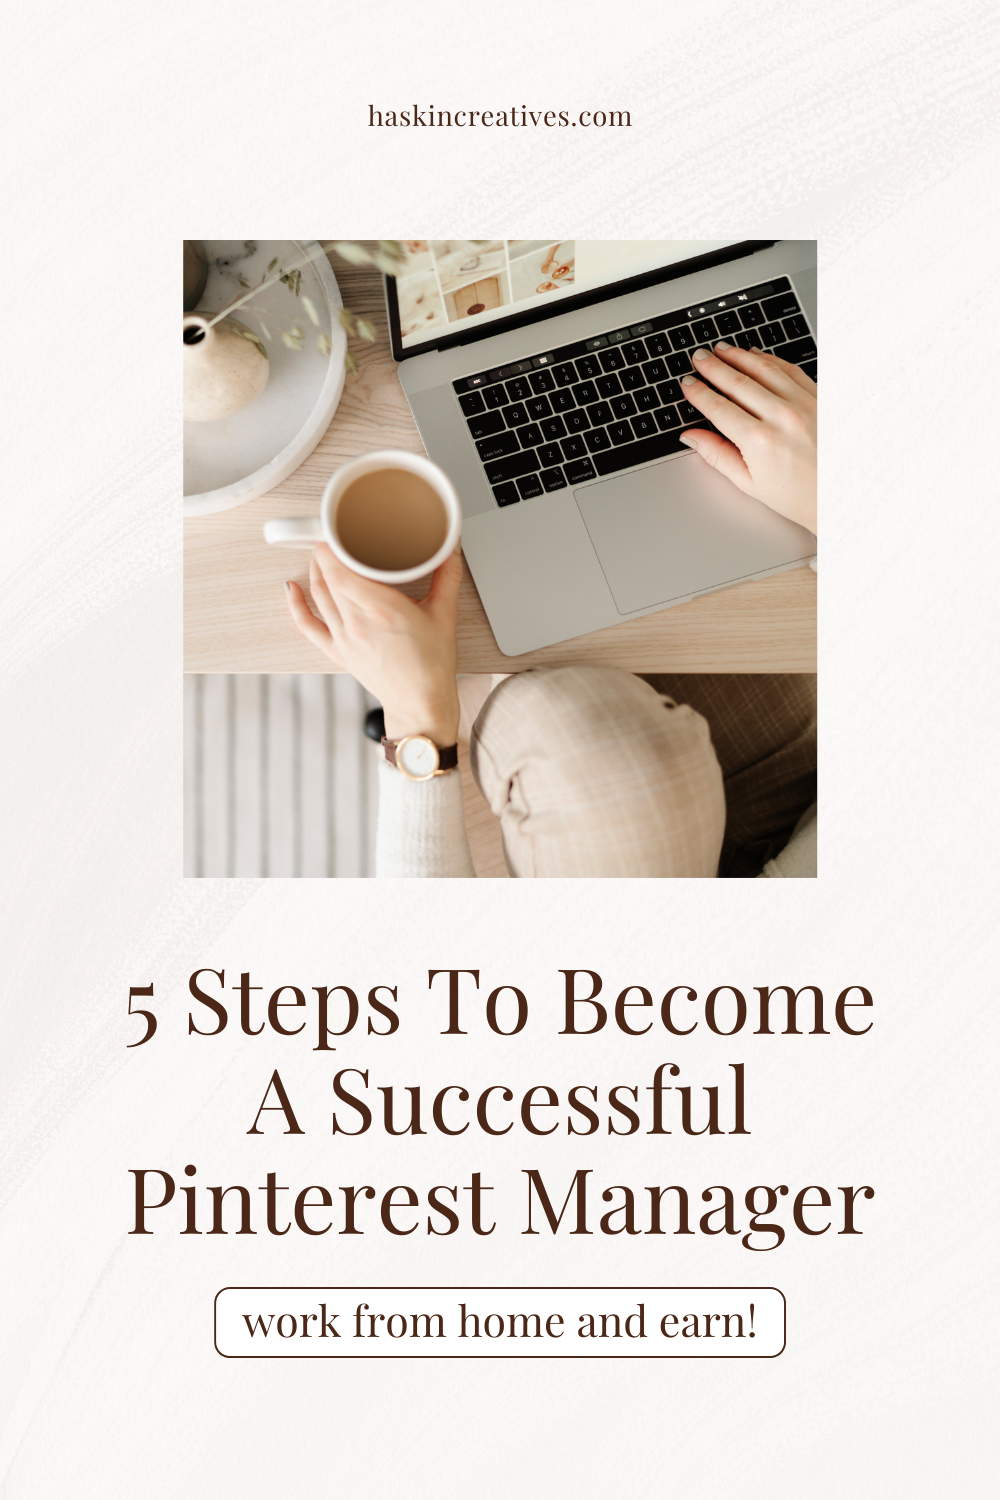 5 Steps to Become a Pinterest Manager - Haskin Creatives